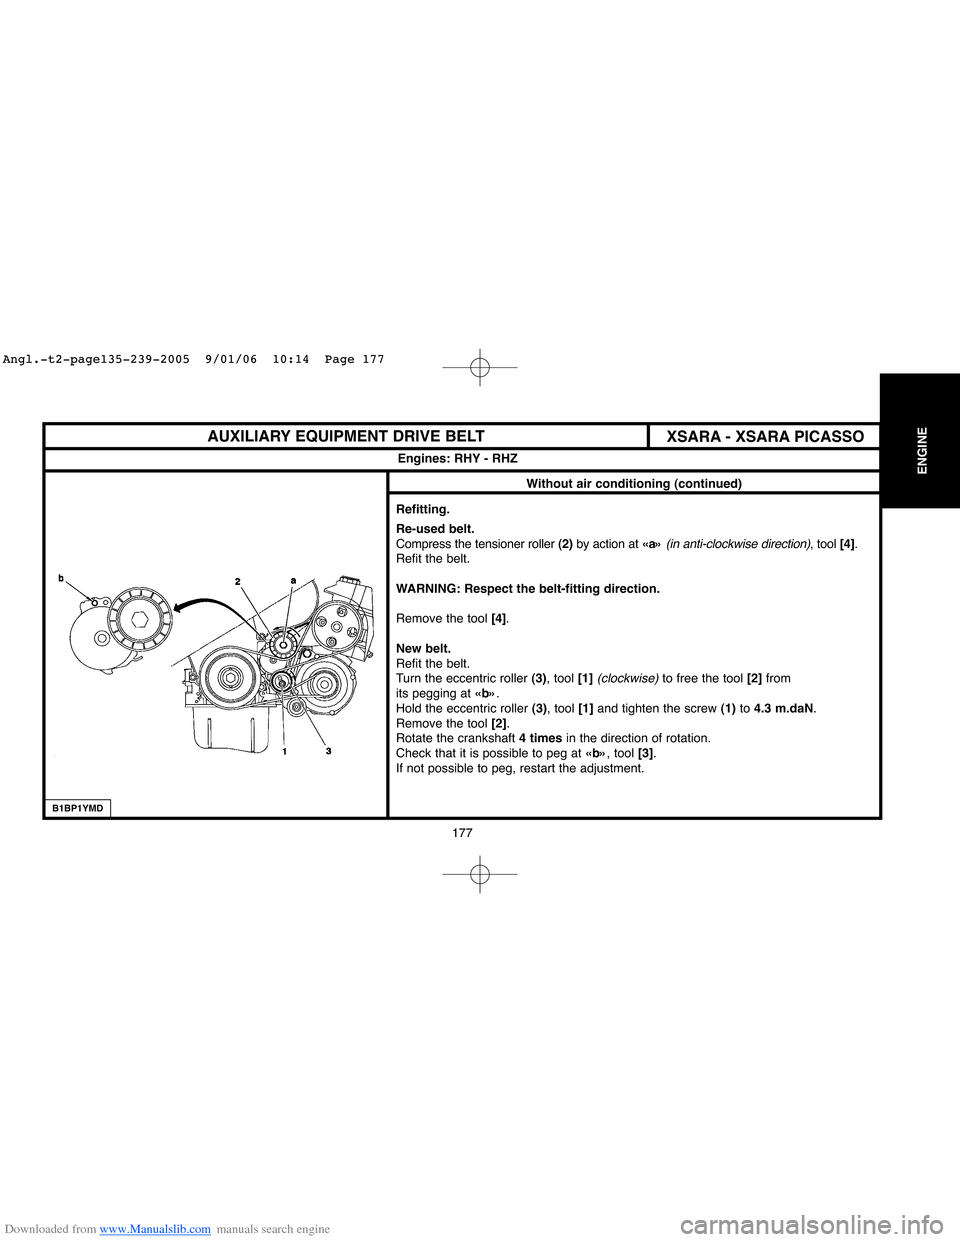 Citroen C4 2005 2.G Manual PDF Downloaded from www.Manualslib.com manuals search engine 177
ENGINE
XSARA - XSARA PICASSO AUXILIARY EQUIPMENT DRIVE BELT
Engines: RHY - RHZ
Without air conditioning (continued)
Refitting.
Re-used belt